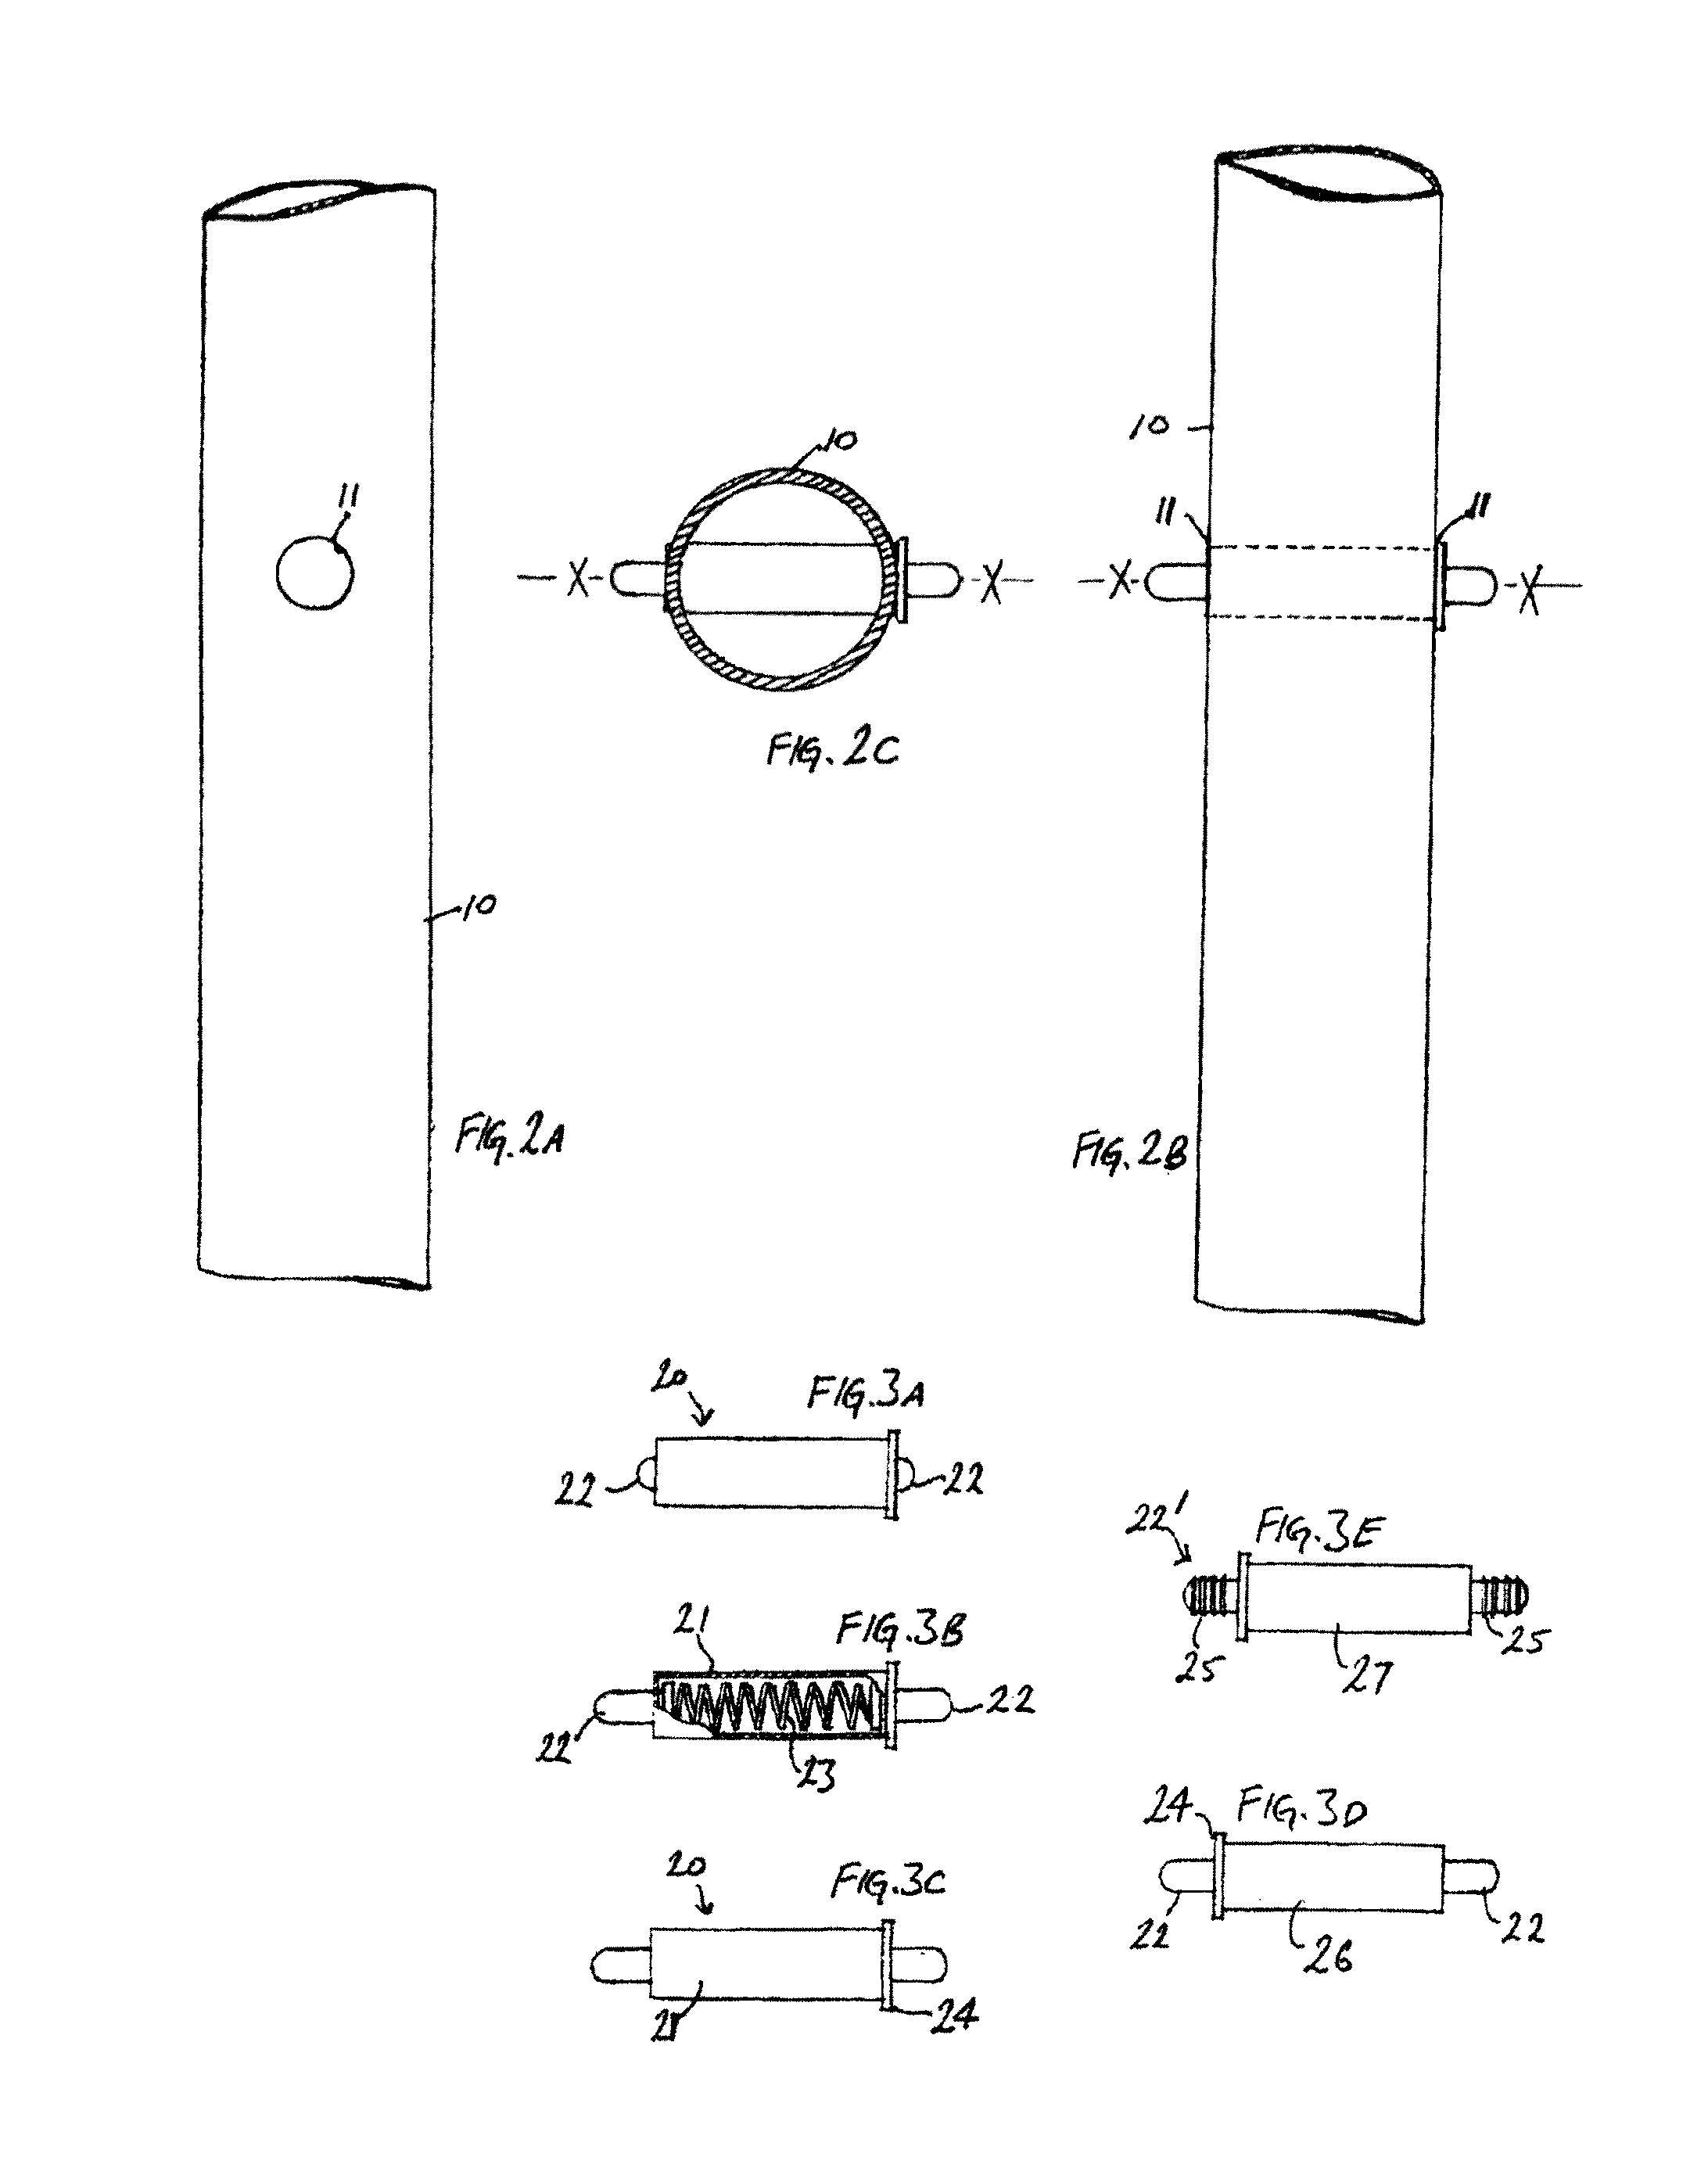 Self-raking fence panel and rail, kit of parts, and method of assembly and installation